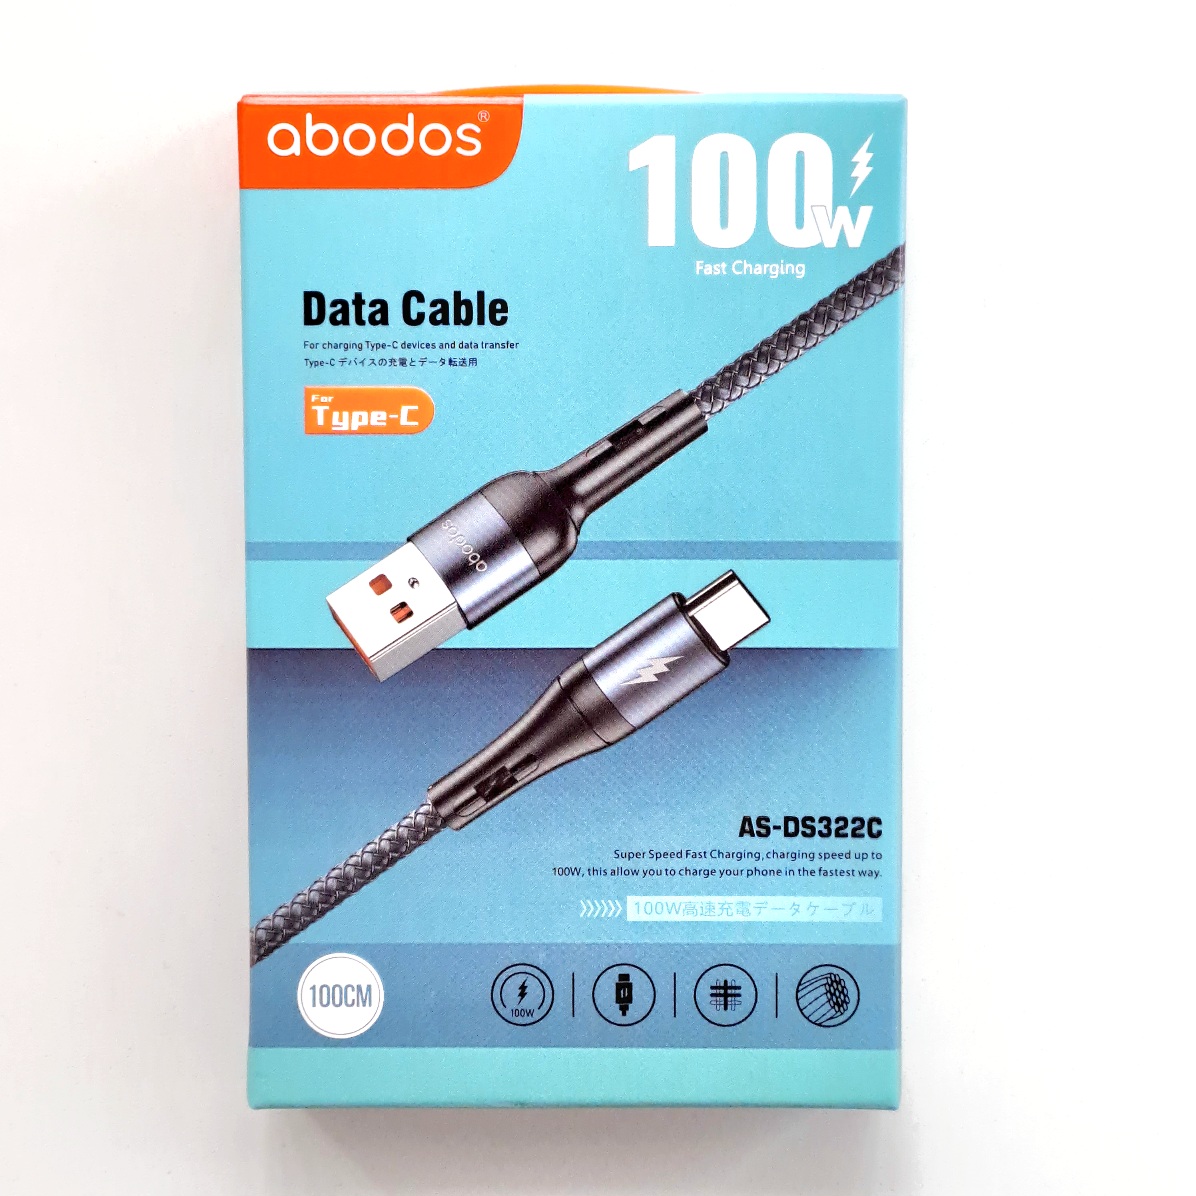 AS-DS322C abodos 100W USB to Type C Data Cable 1m Black